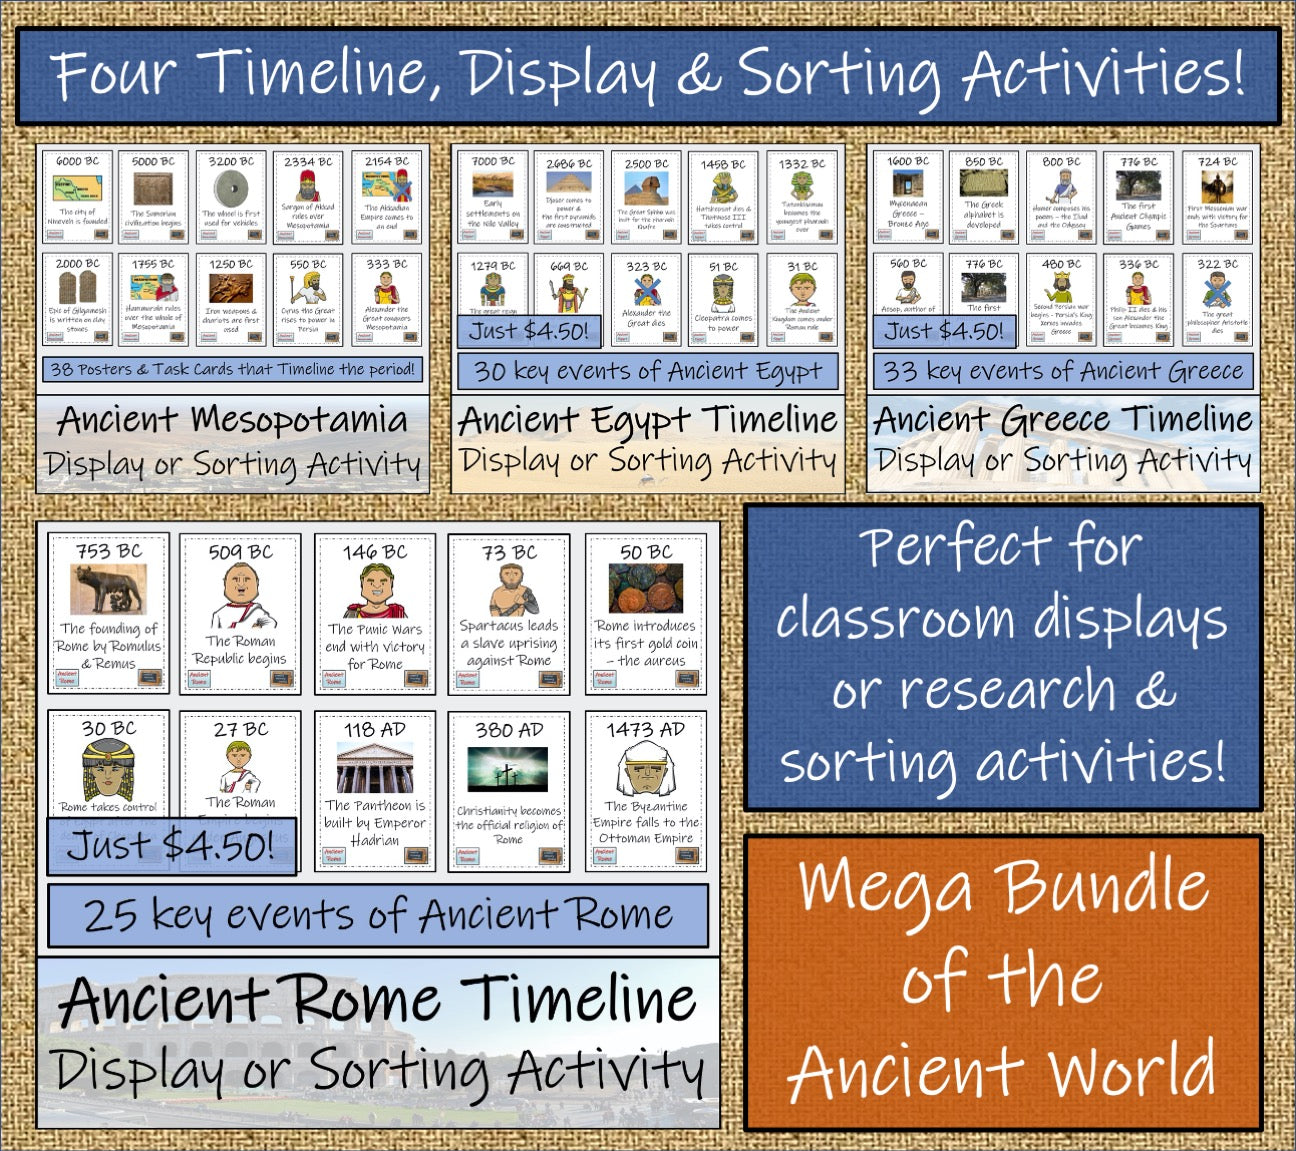 Ancient History Mega Bundle | 3rd & 4th Grade | 80 hours of Activities